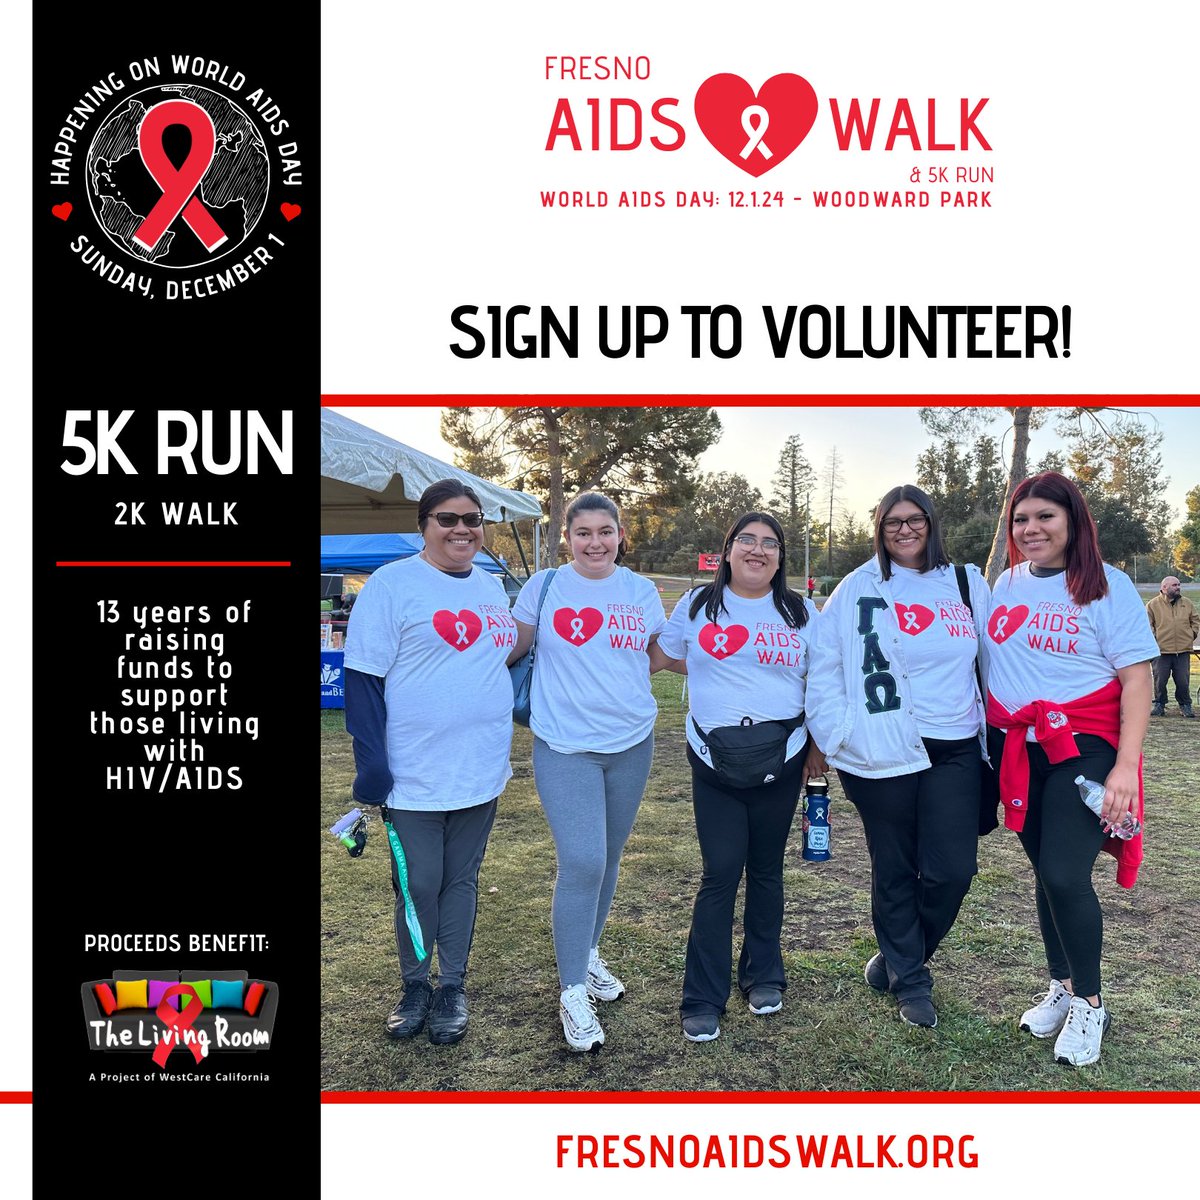 Looking for a volunteer opportunity to support your local community? This #WorldAIDSday, become a volunteer with us! Sign up today: westcare.link/fresnoaidswalk….

#volunteering #volunteer #volunteers #charity #community #nonprofit #giveback